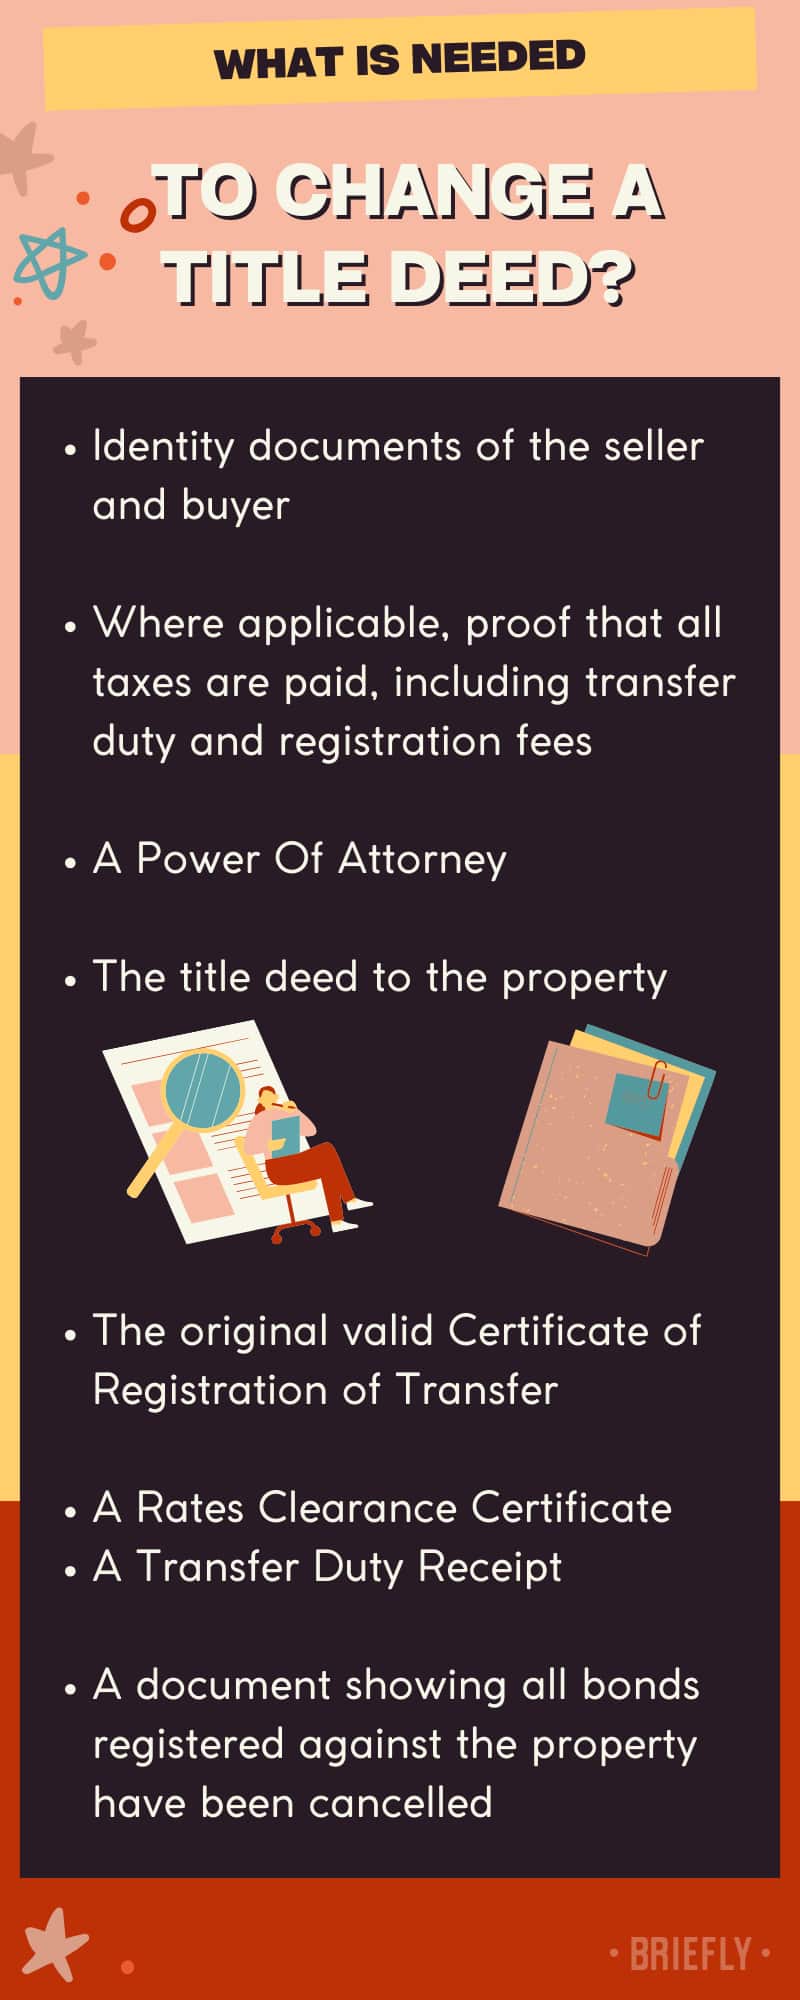 What is needed to change a title deed?